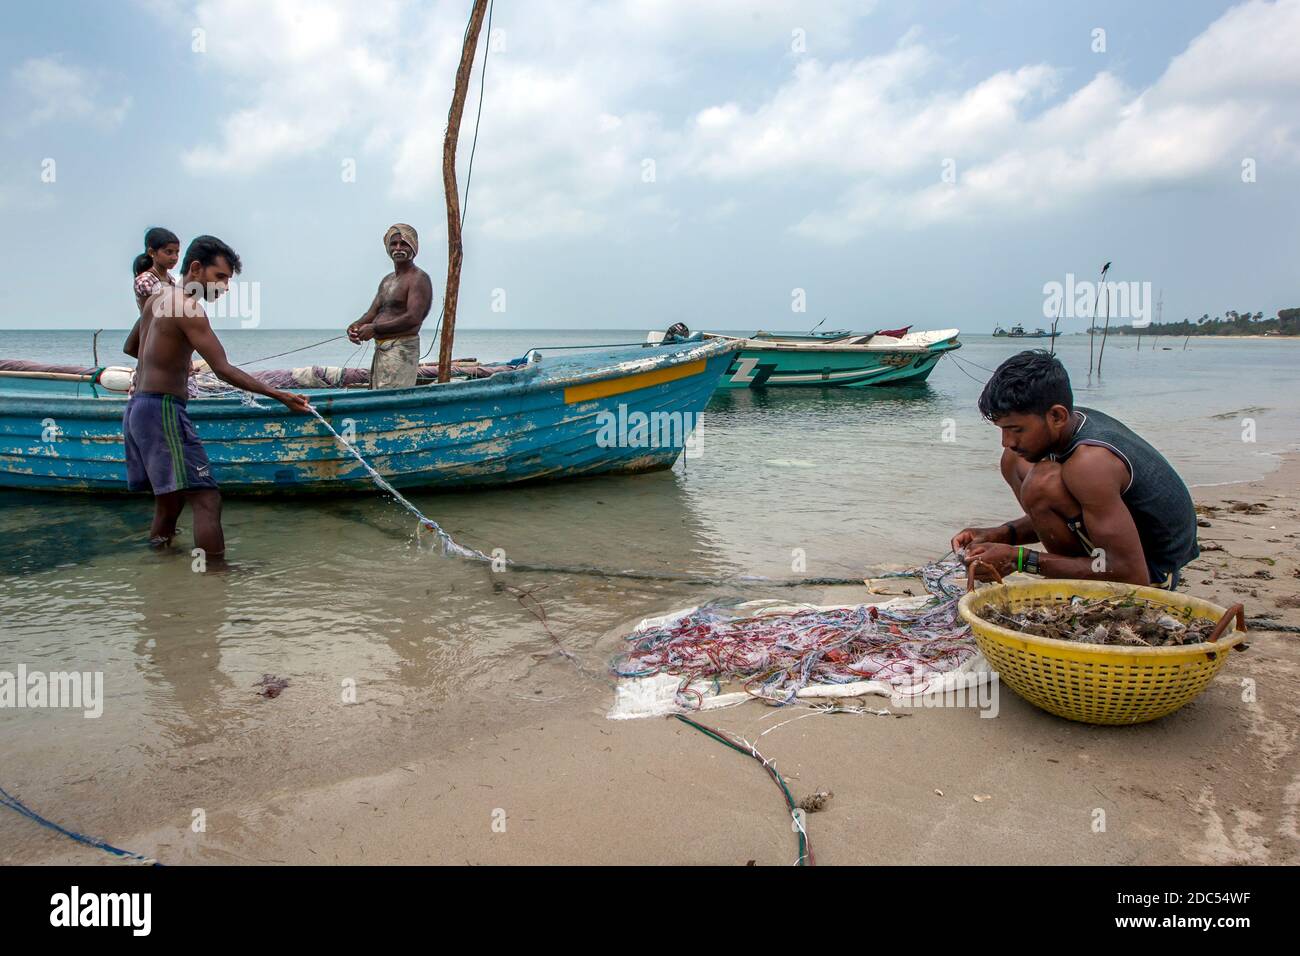 Fishermen and women attending to their nets on a west coast beach on Delft Island in the Jaffna region of Sri Lanka. Stock Photo